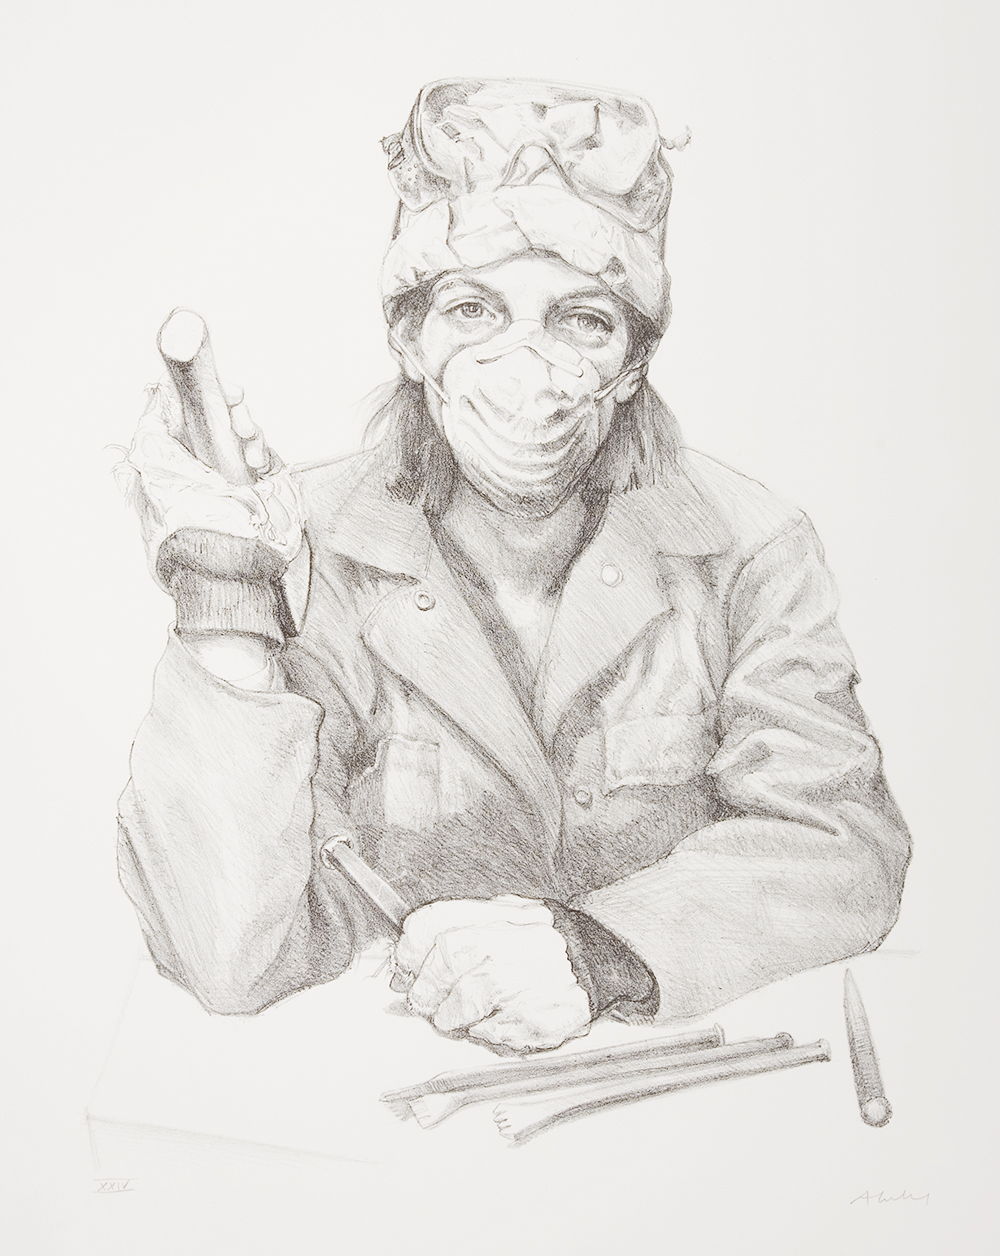 a lithograph that looks like a pencil drawing shows a portrait of a female sculptor from the waist up. She is looking straight at the viewer. She has a hat on her head with some safety glasses on the hat. Her face is covered in a dust mask. She has on a heavy coat and is wearing work gloves. In her right hand is a mallet and in her left hand a chisel. There are four chisels laying on the table. 